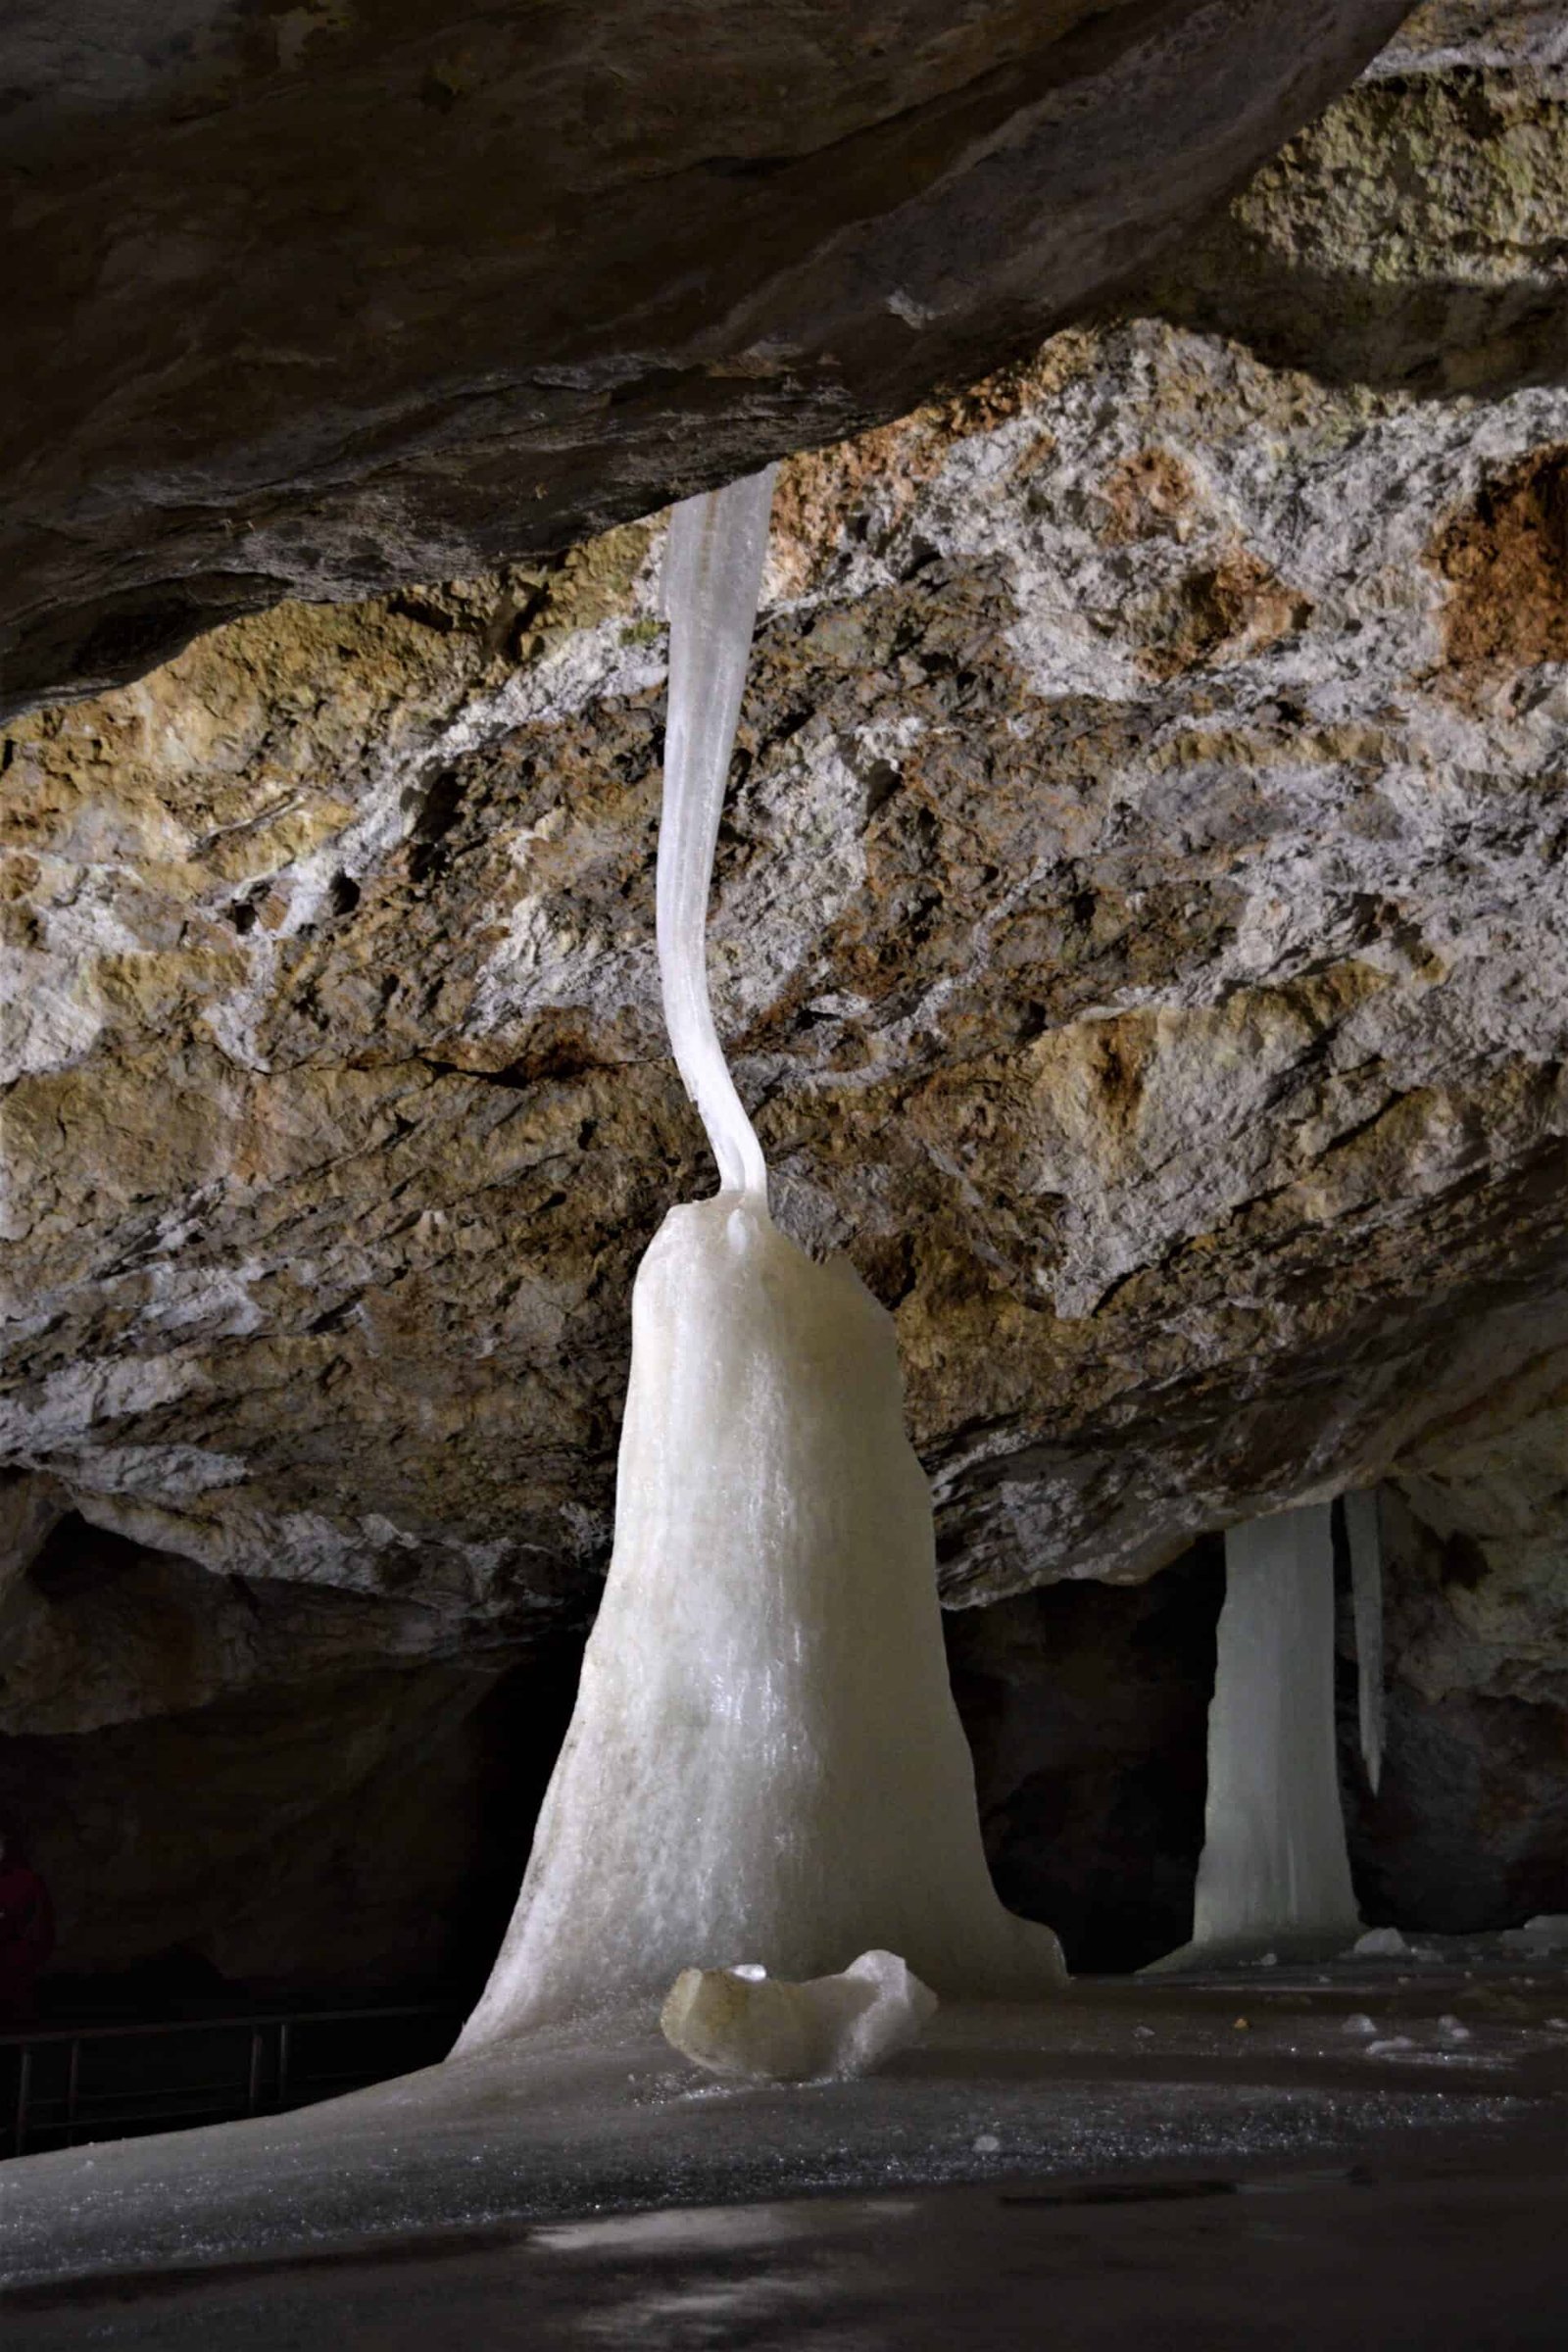 a ghostly looking ice mount connects to the ceiling via a thin frozen ice strand (back view), Dobsina Ice Cave, Slovakia